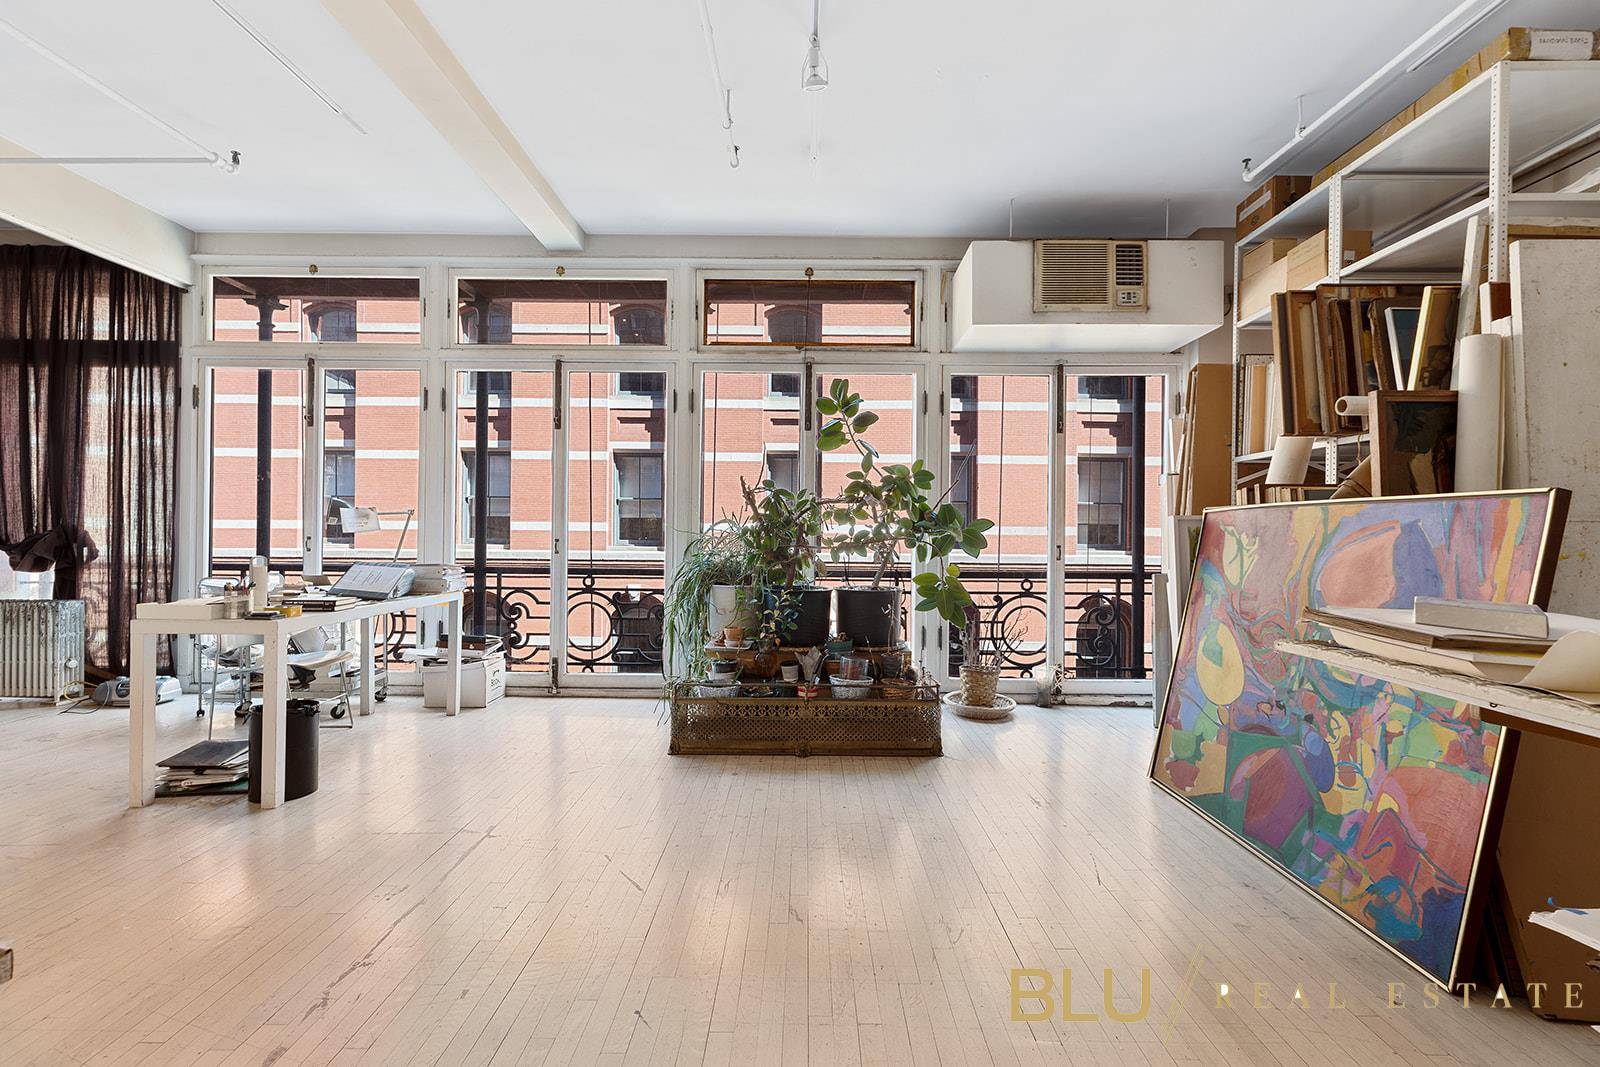 BRING YOUR ARCHITECT ! This is a true artist live work 2, 000 sf loft in the heart of SoHo.